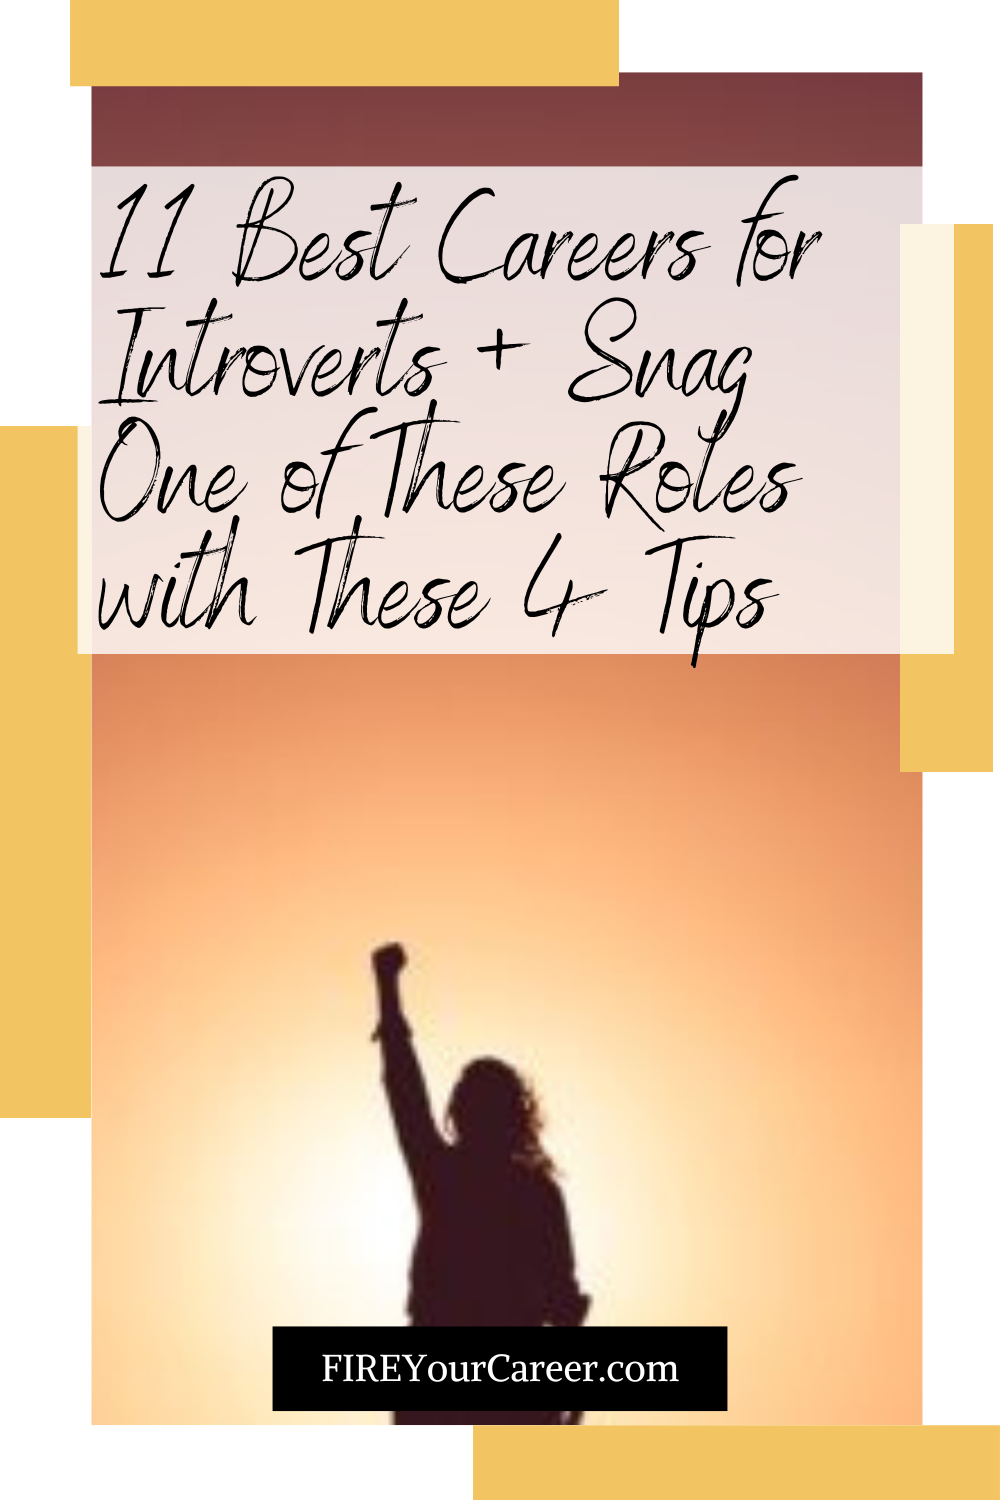 11 Best Careers for Introverts + Snag One of These Roles with These 4 Tips